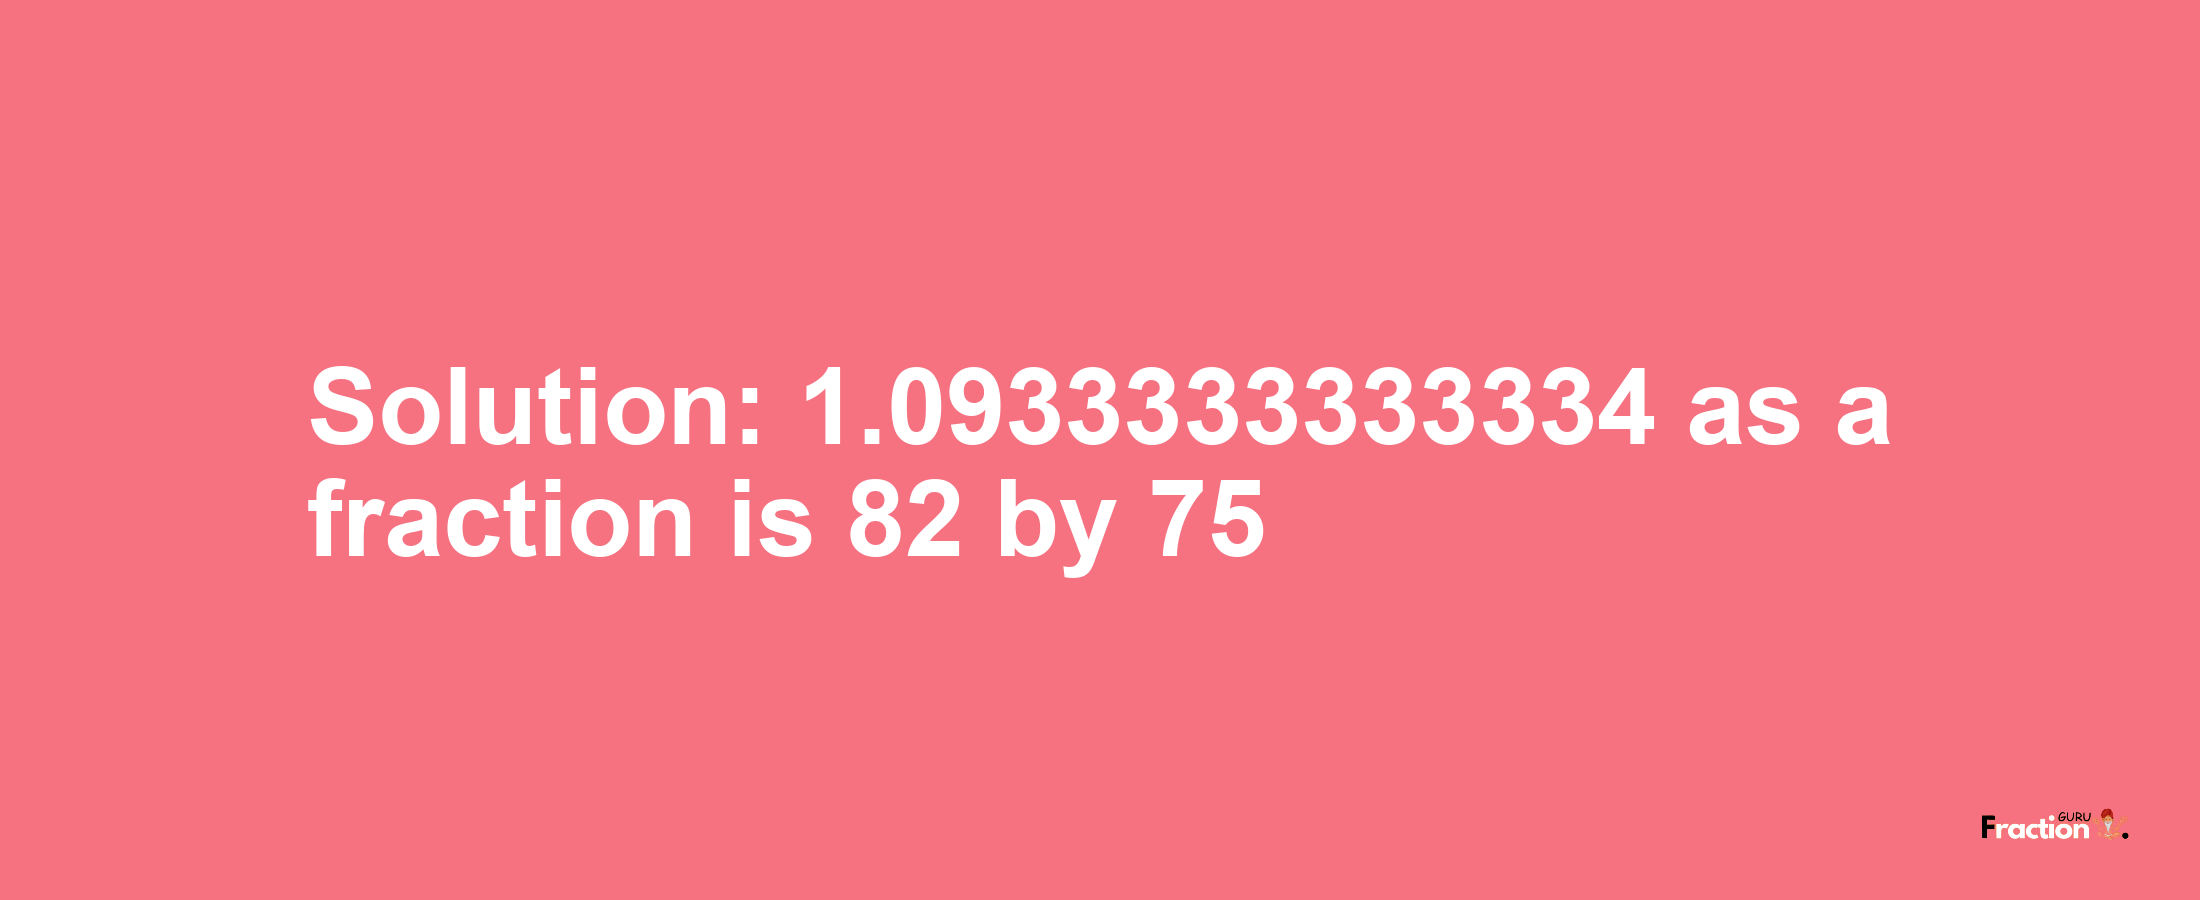 Solution:1.0933333333334 as a fraction is 82/75